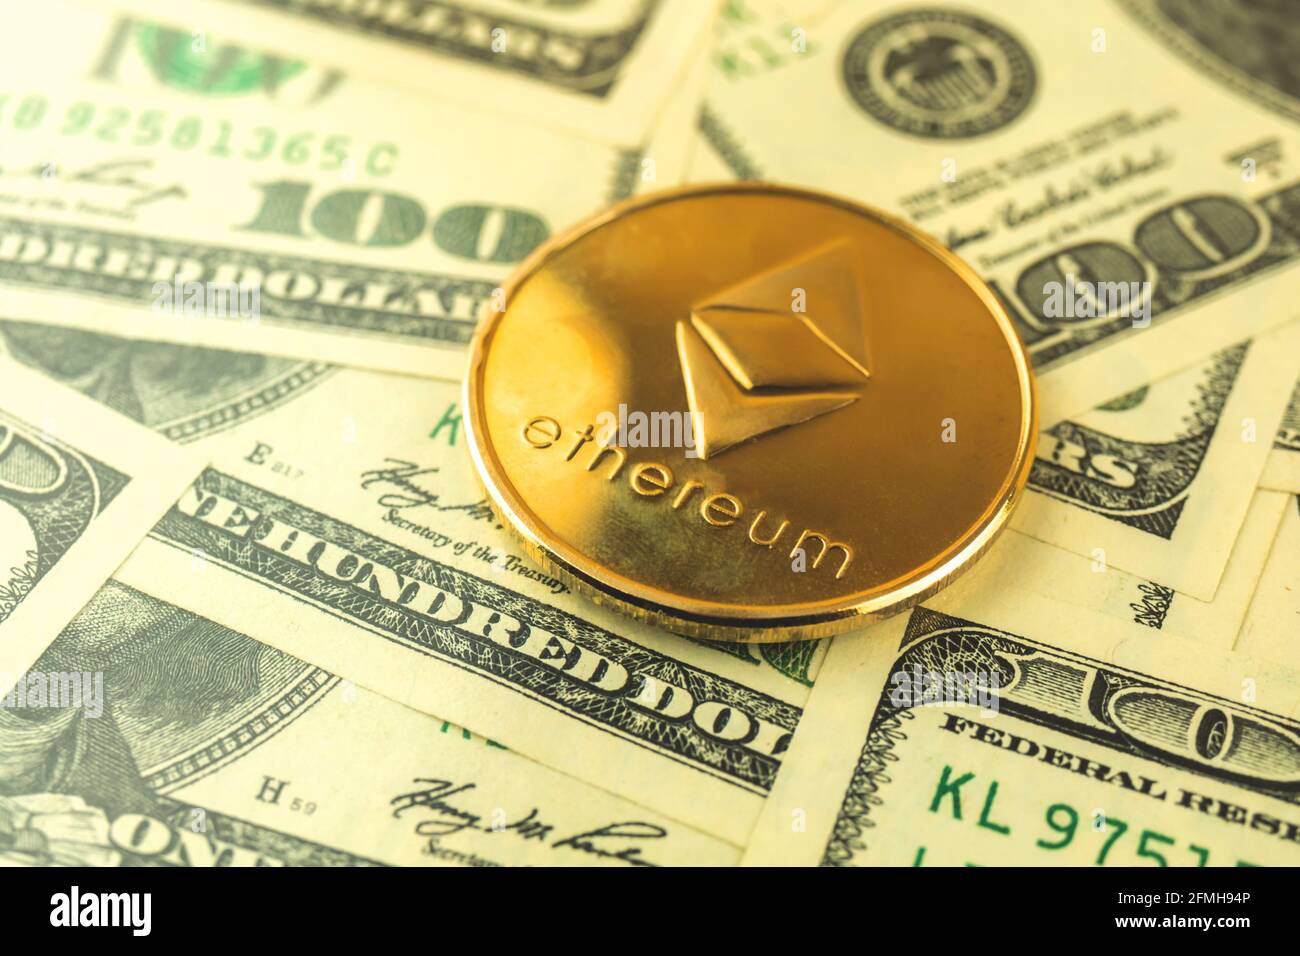 Ethereum dollar exchange are sending fees lower with litecoin than bitcoin